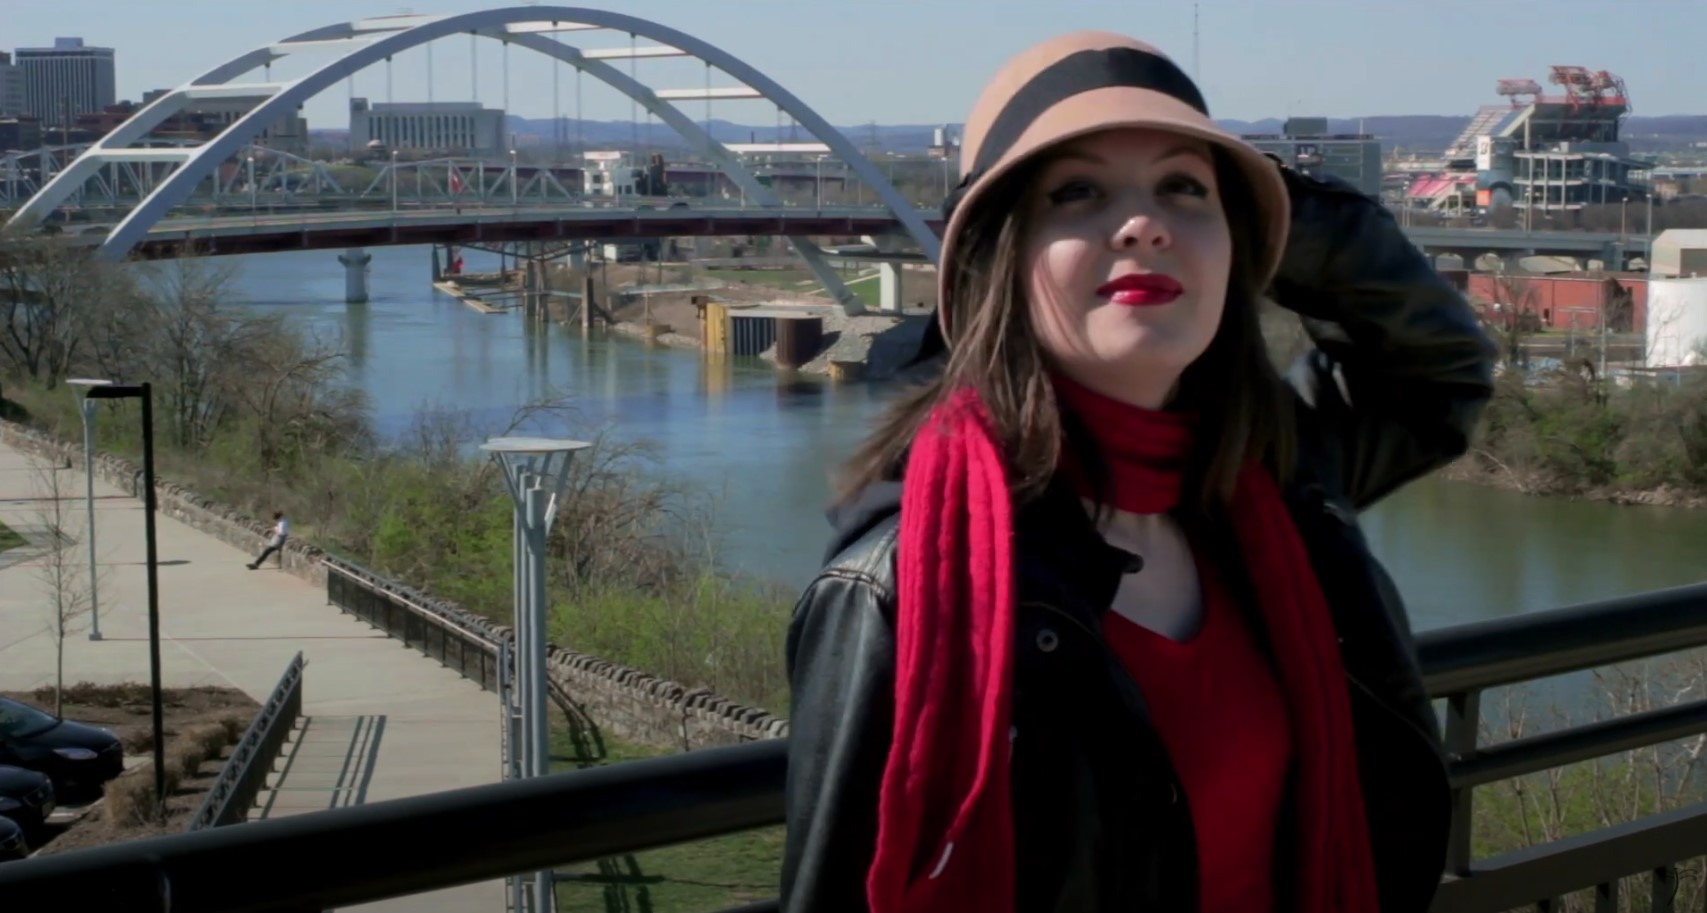 Whistling Dixie by Jo Rankin - Music Video - Music video shot by Jackie Gamber